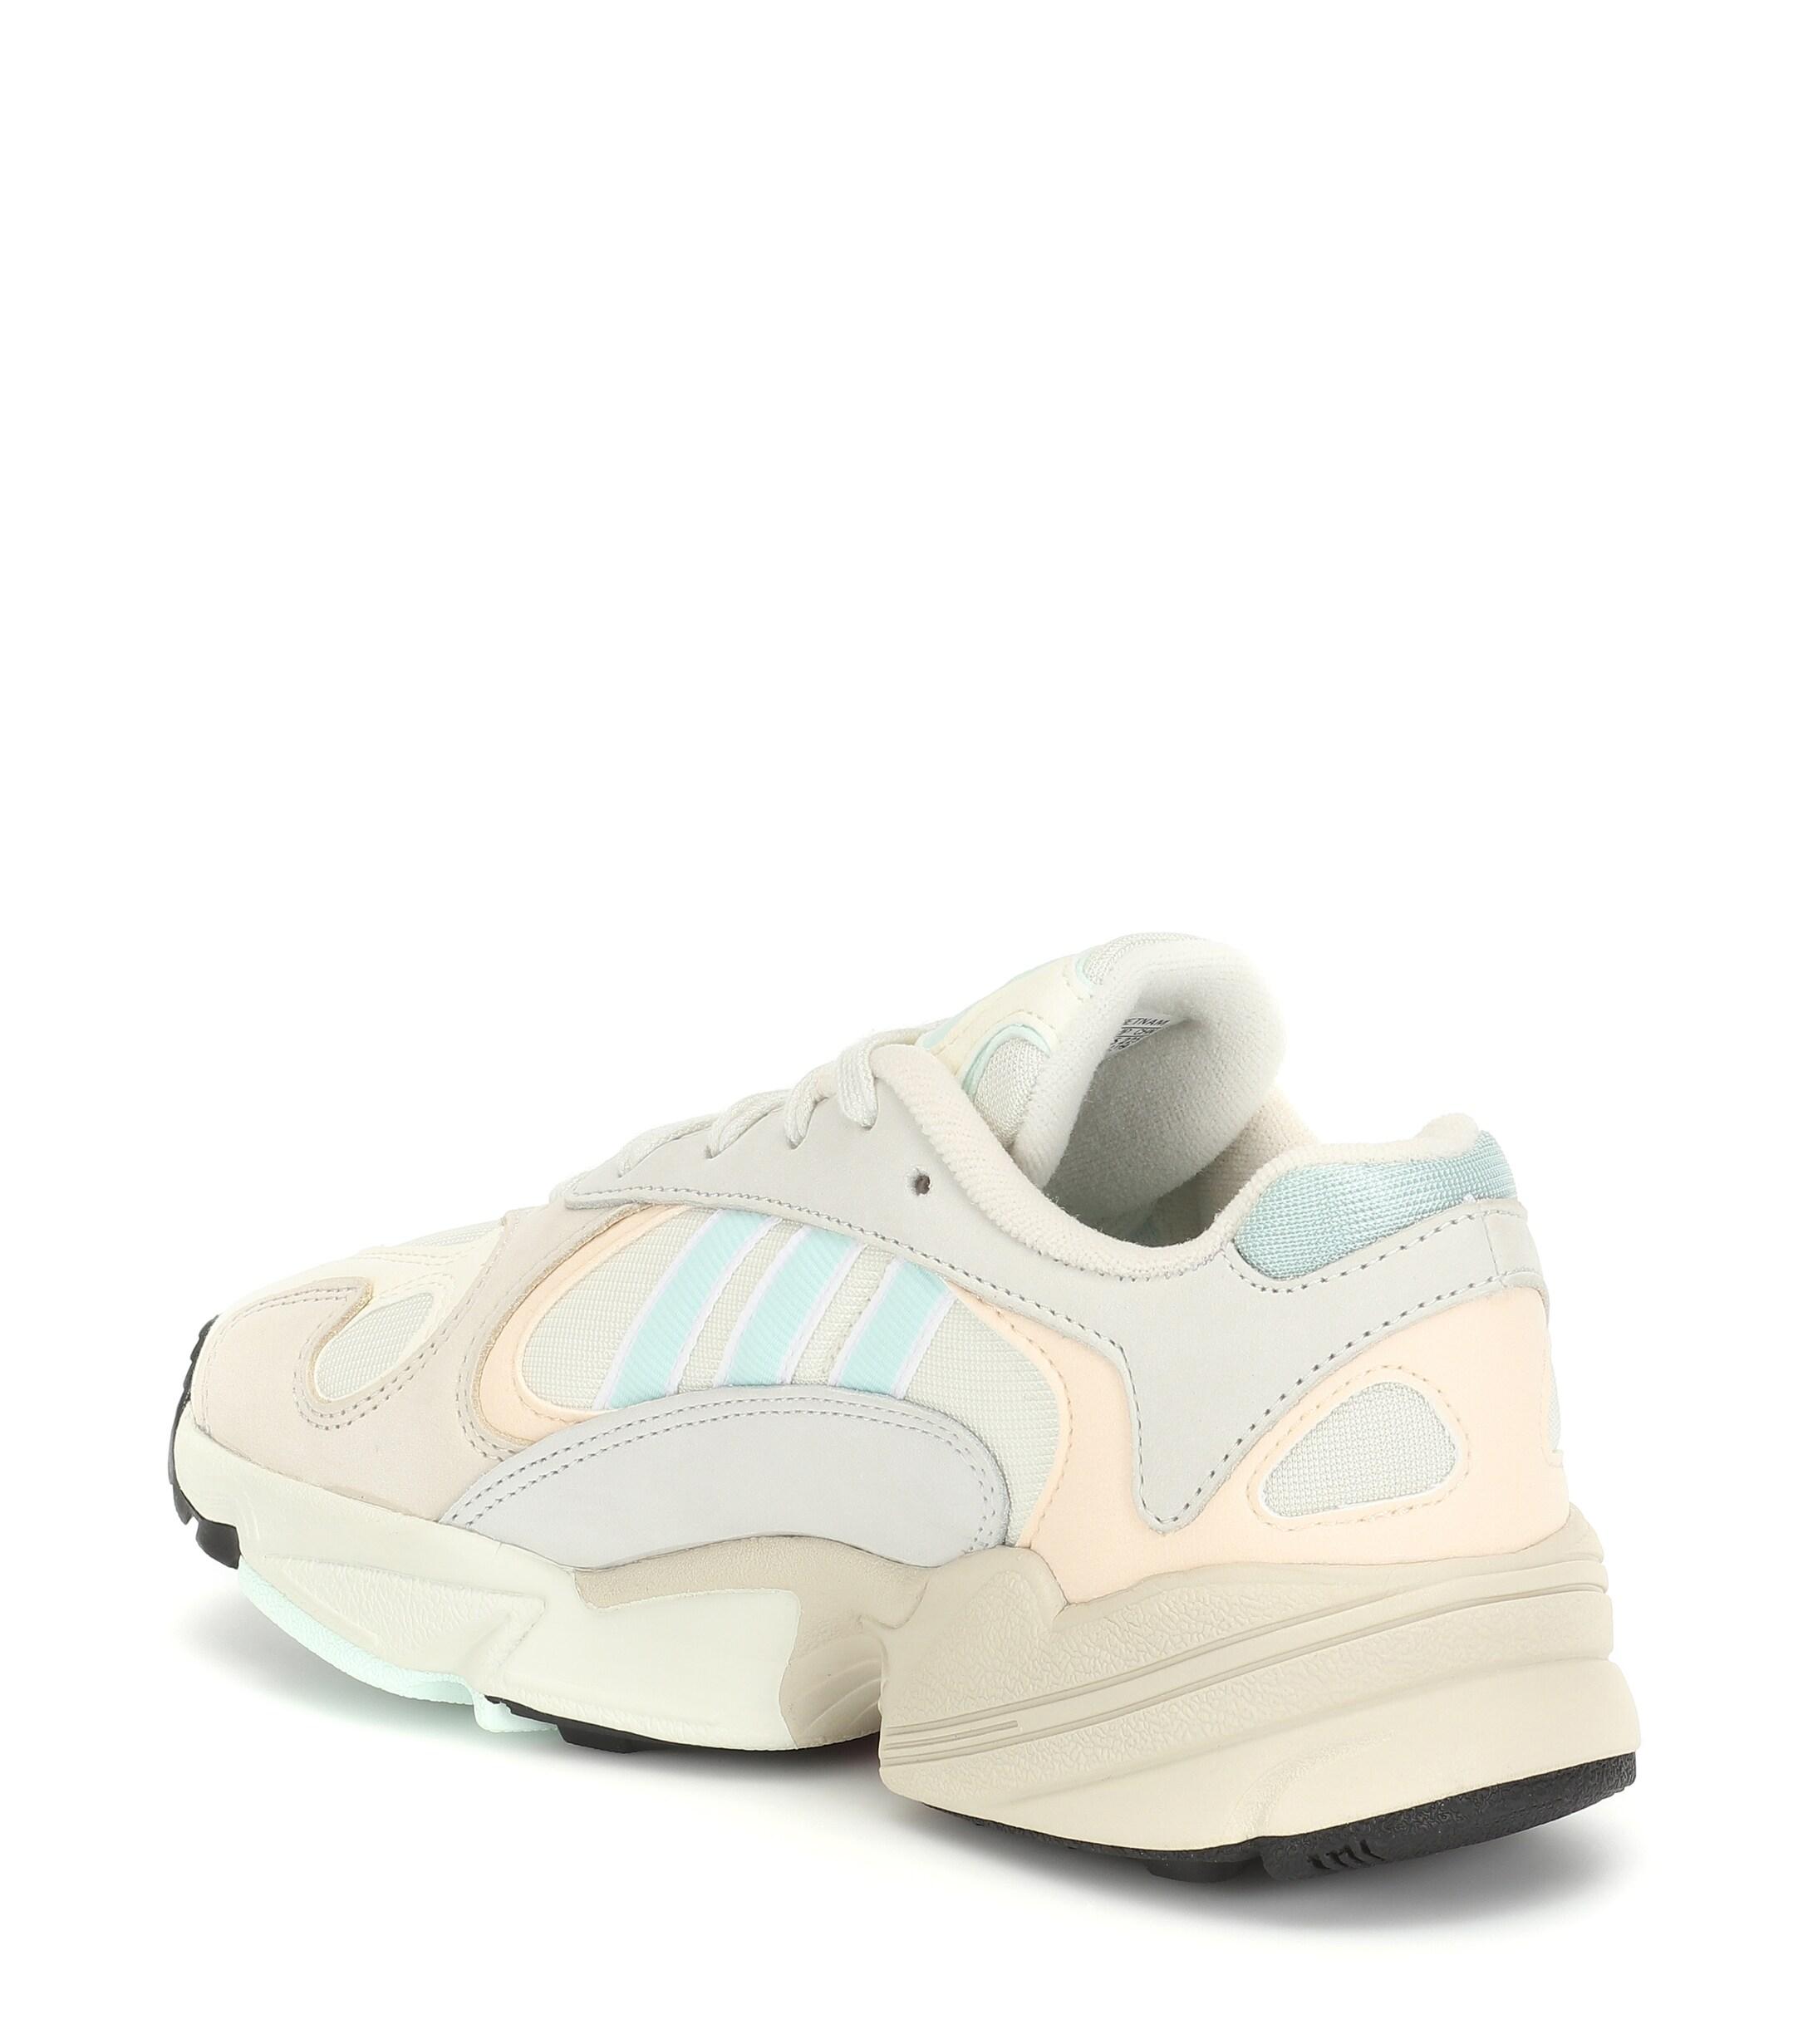 adidas Originals Yung 1 Leather Sneakers in Beige (White) - Lyst